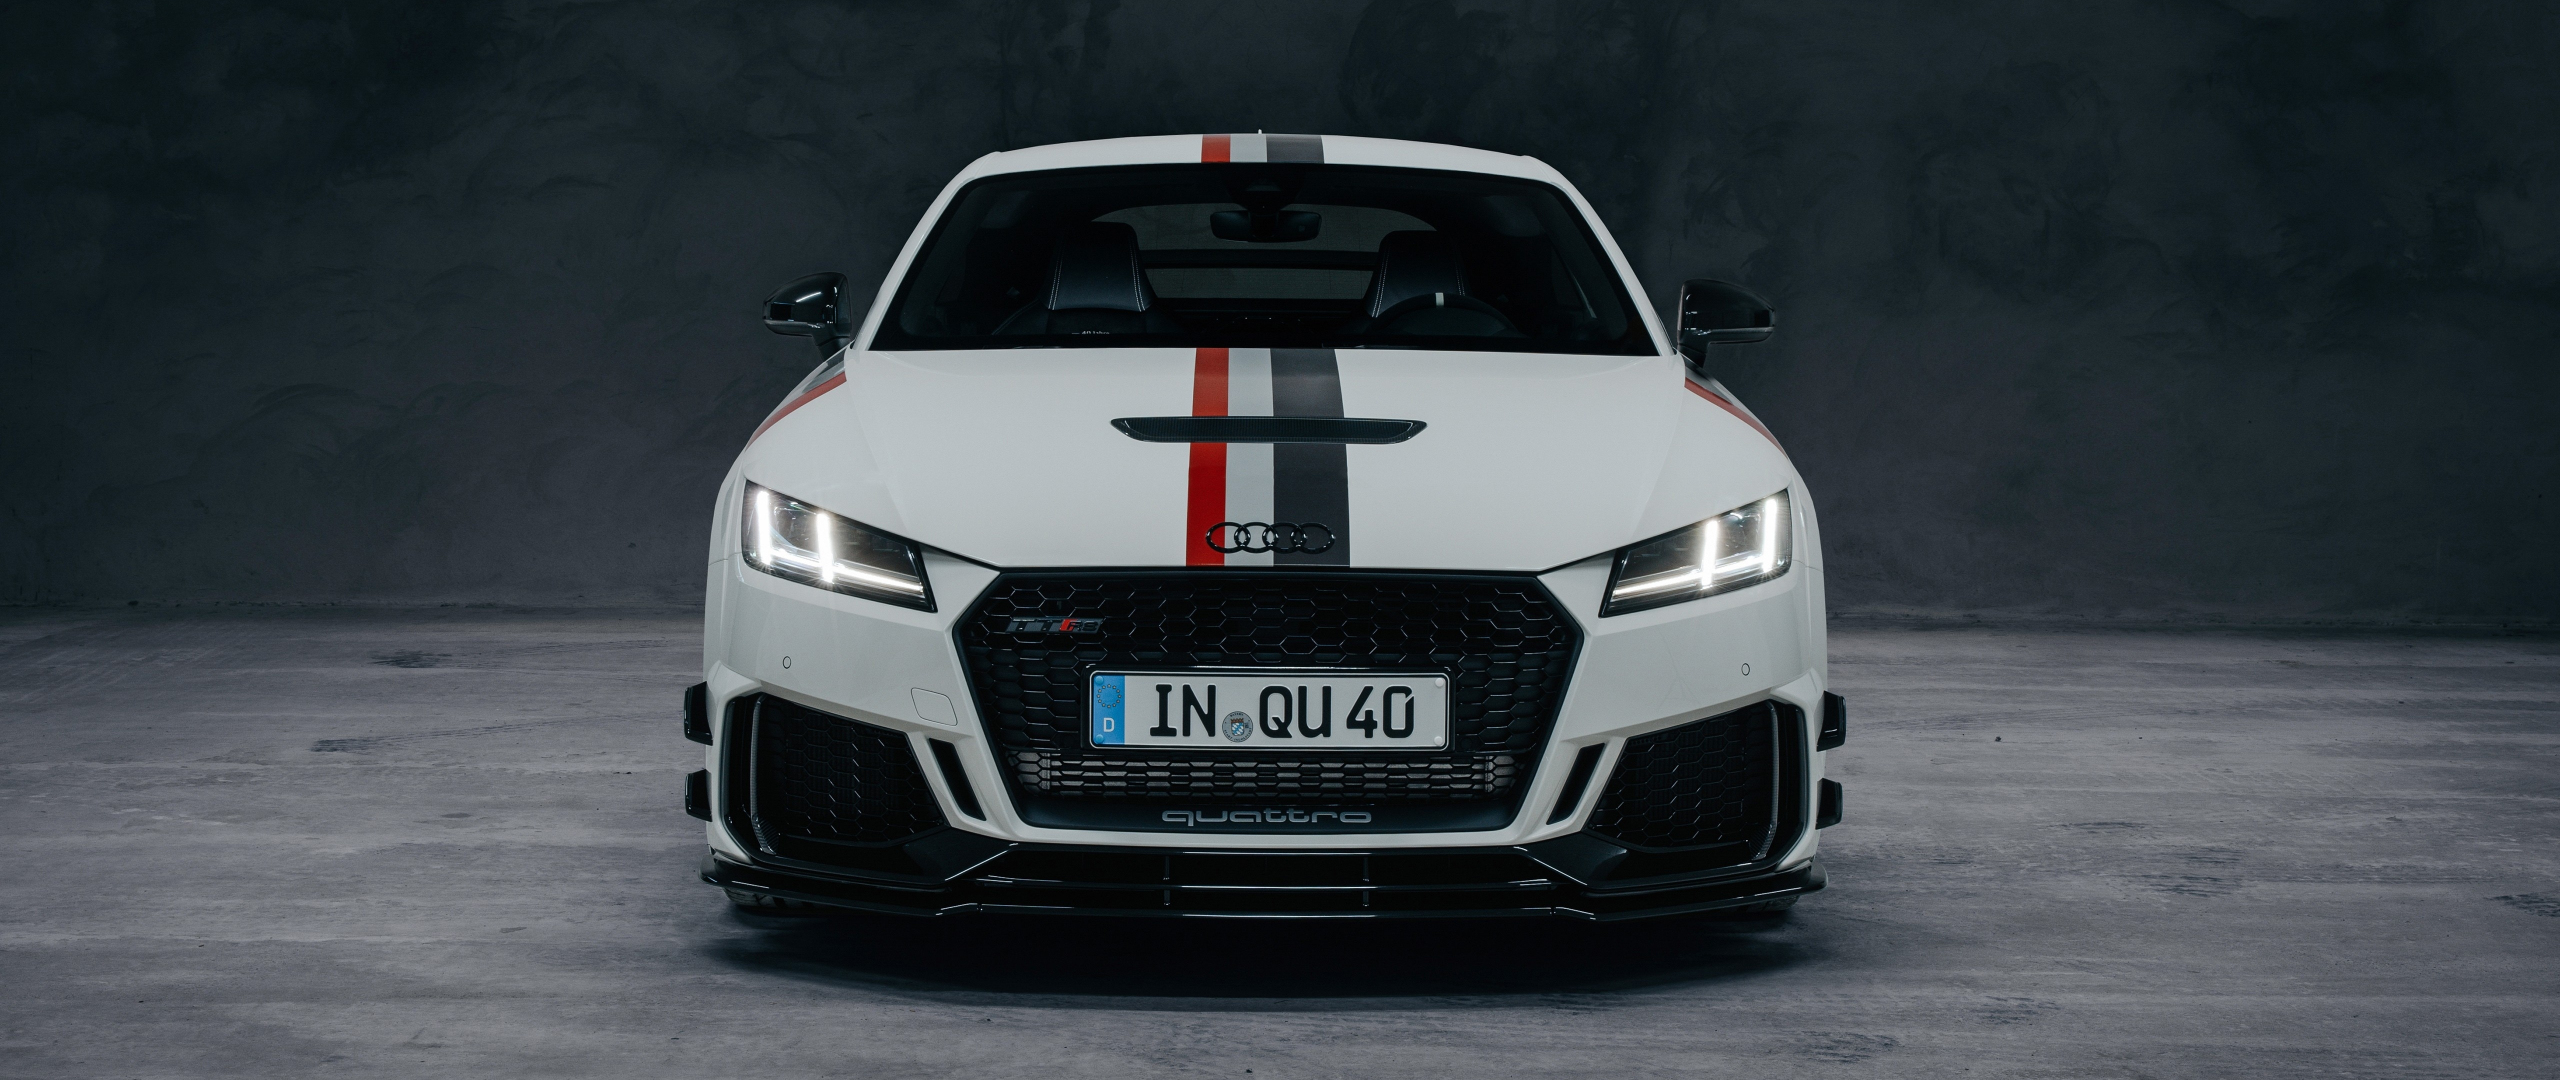 Download 2560x1080 Wallpaper White Car Audi Tt Rs Coupe 2020 Dual Wide Widescreen 2560x1080 Hd Image Background 26416